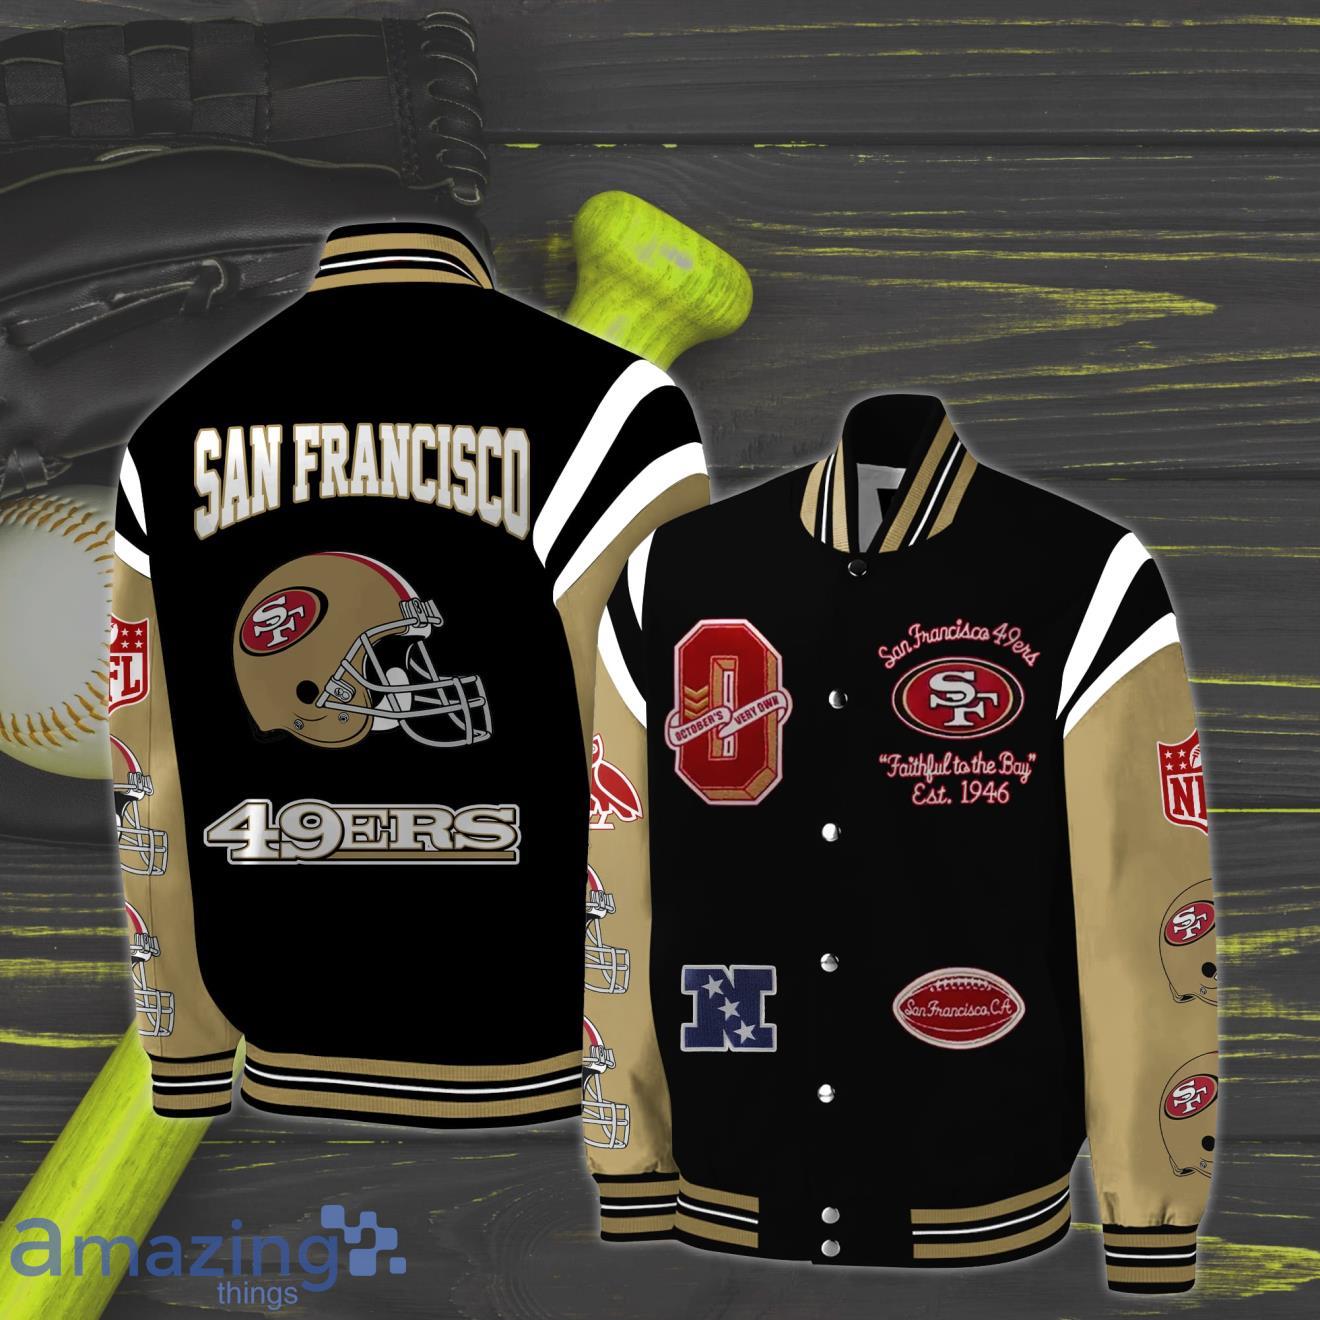 San Francisco 49ers Womens Outfits Casual Cropped Varsity Jacket